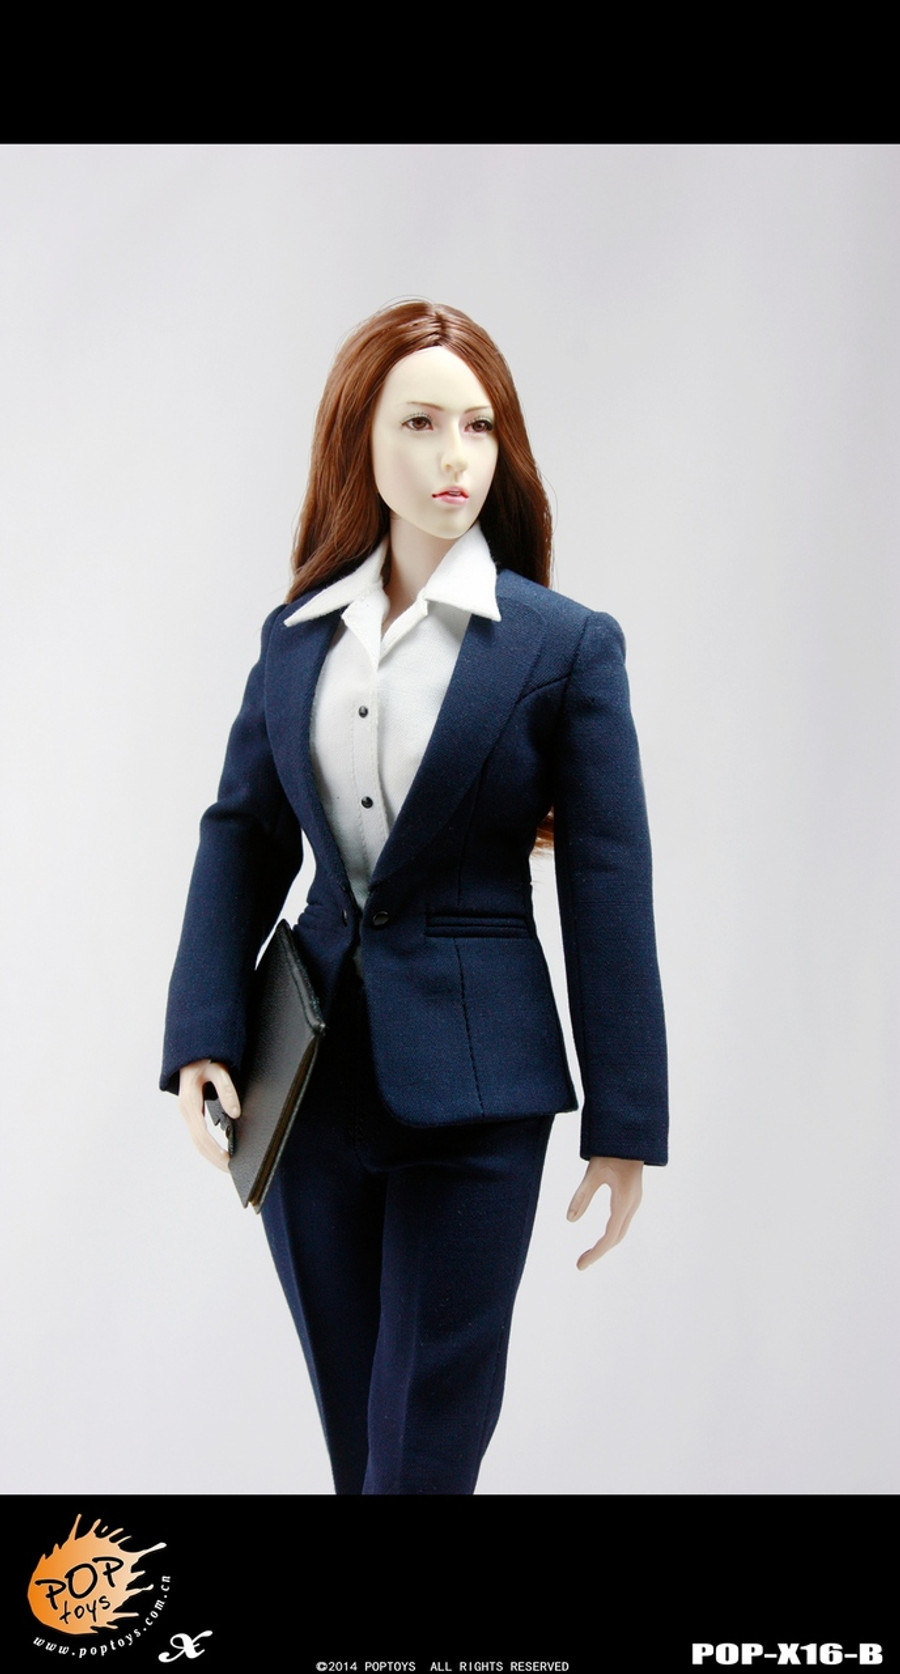 Workplace Female Elite - Office Lady Suit 2.0 Navy Blue